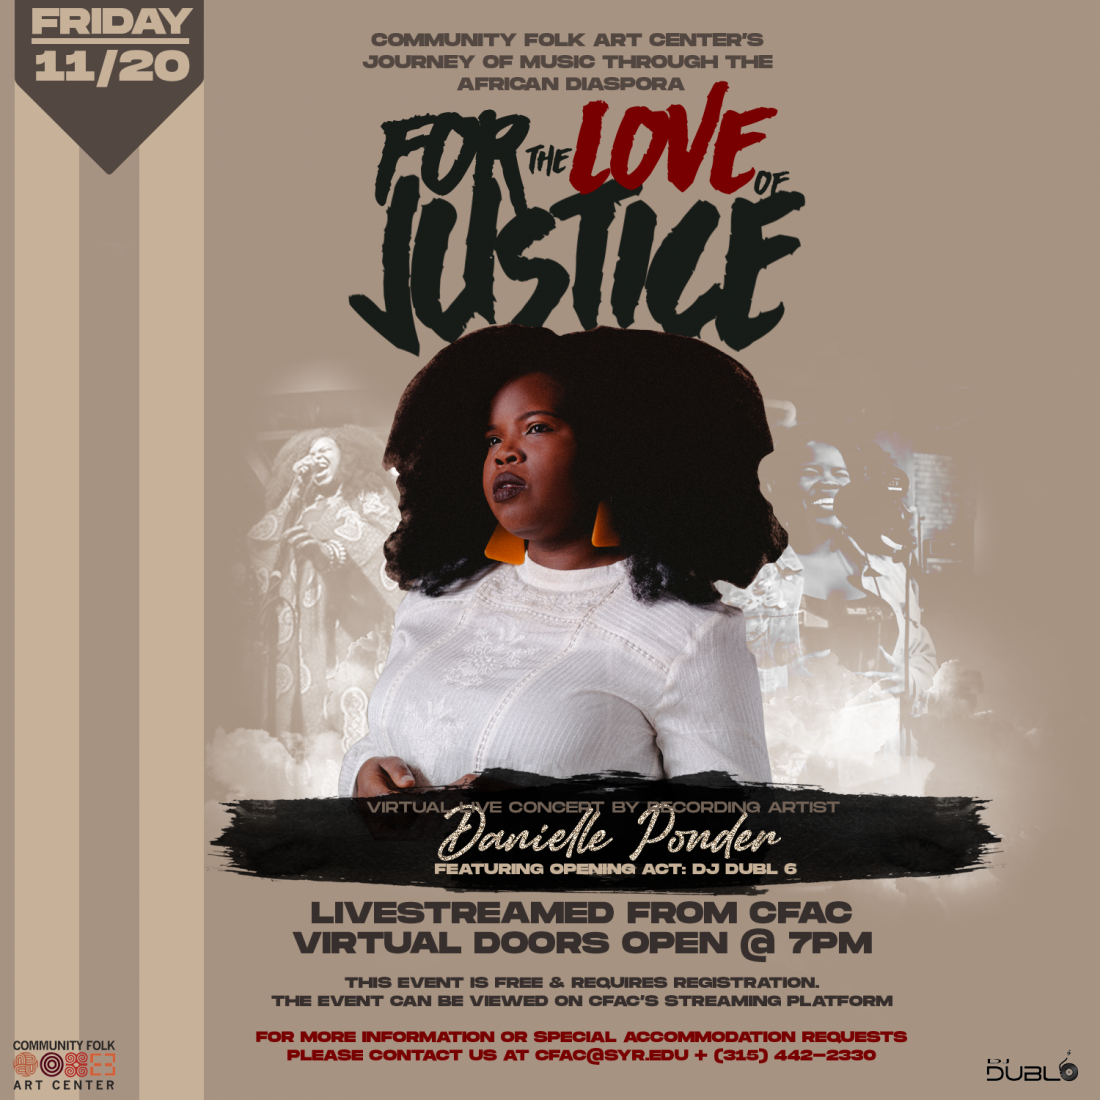 Event flyer with photo of Danielle Ponder and event details